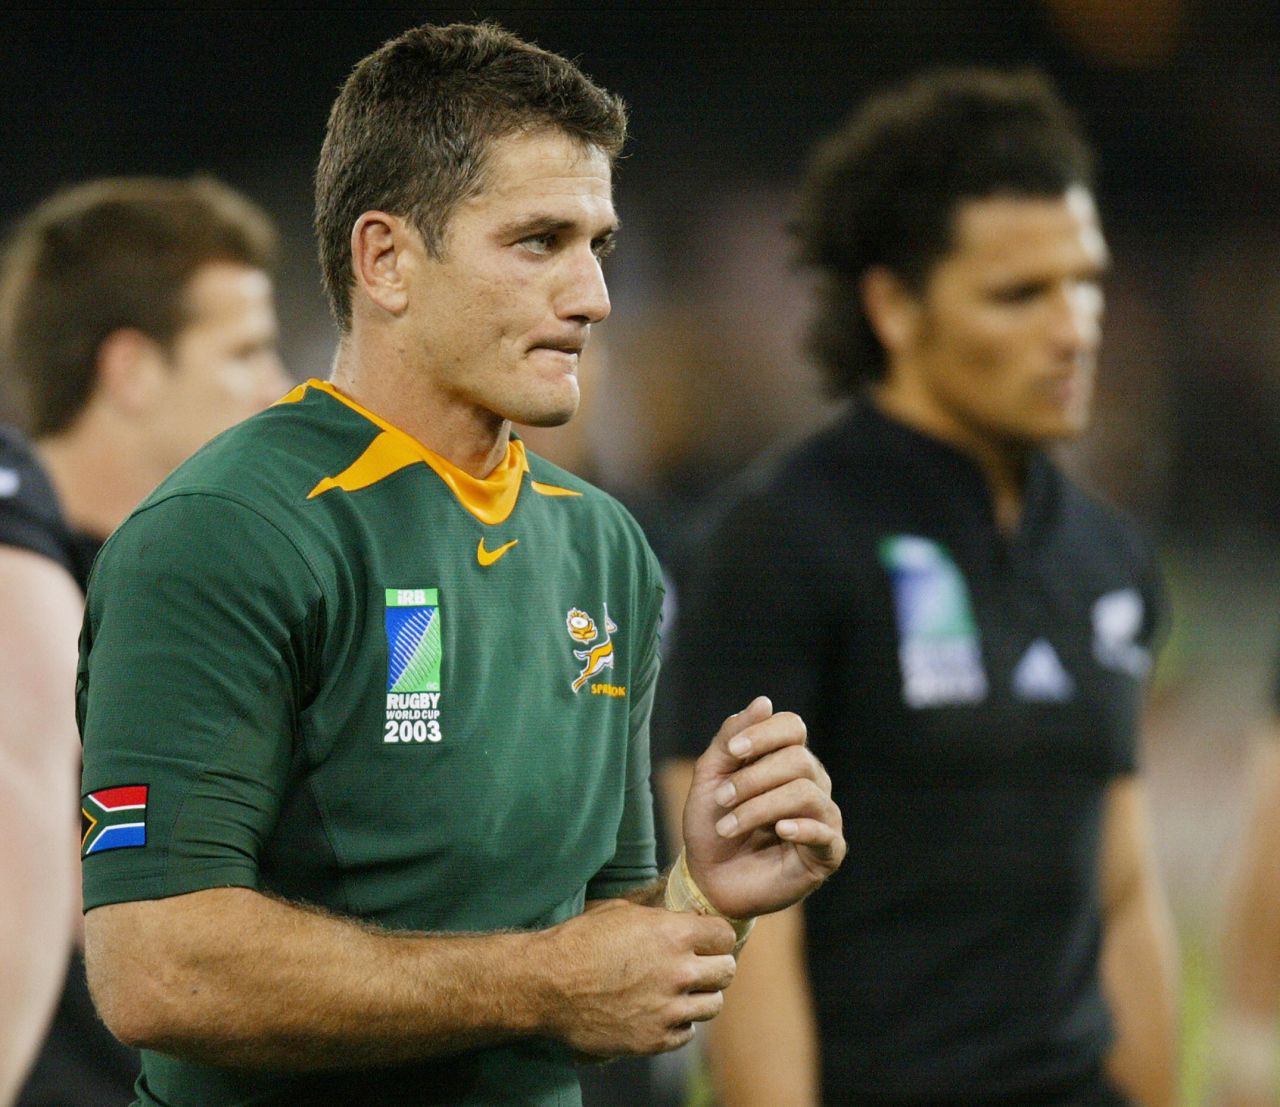 Van der Westhuizen played his final Test match for South Africa against New Zealand, in a quarterfinal defeat at the 2003 World Cup. At the time of his retirement, Van der Westhuizen was the most-capped player in Springboks history.